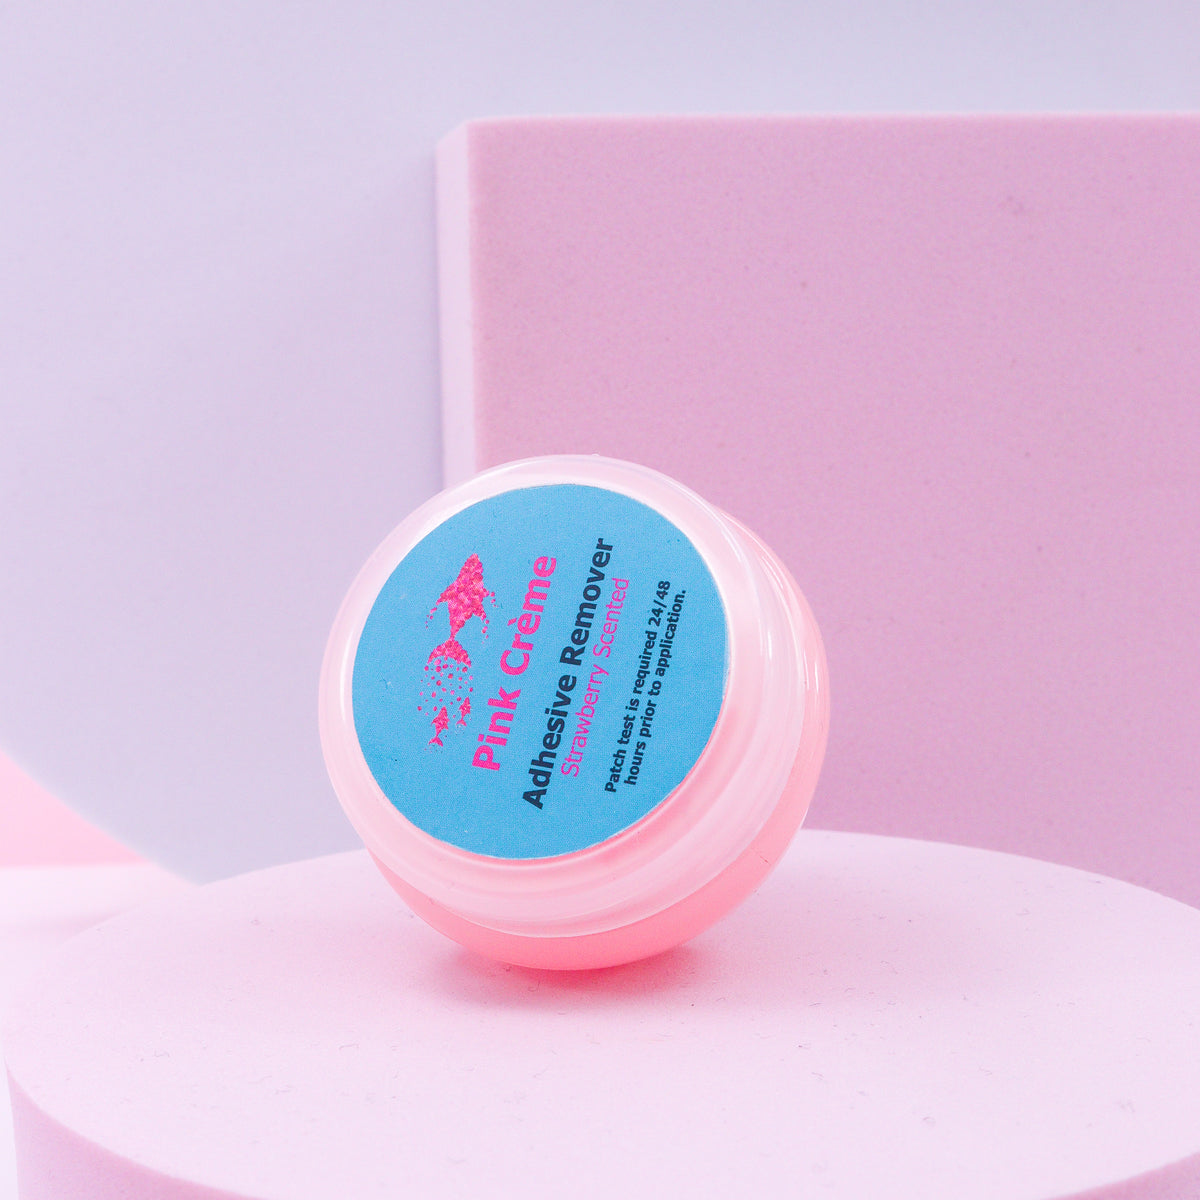 Pink Crème - Adhesive Remover (15g)